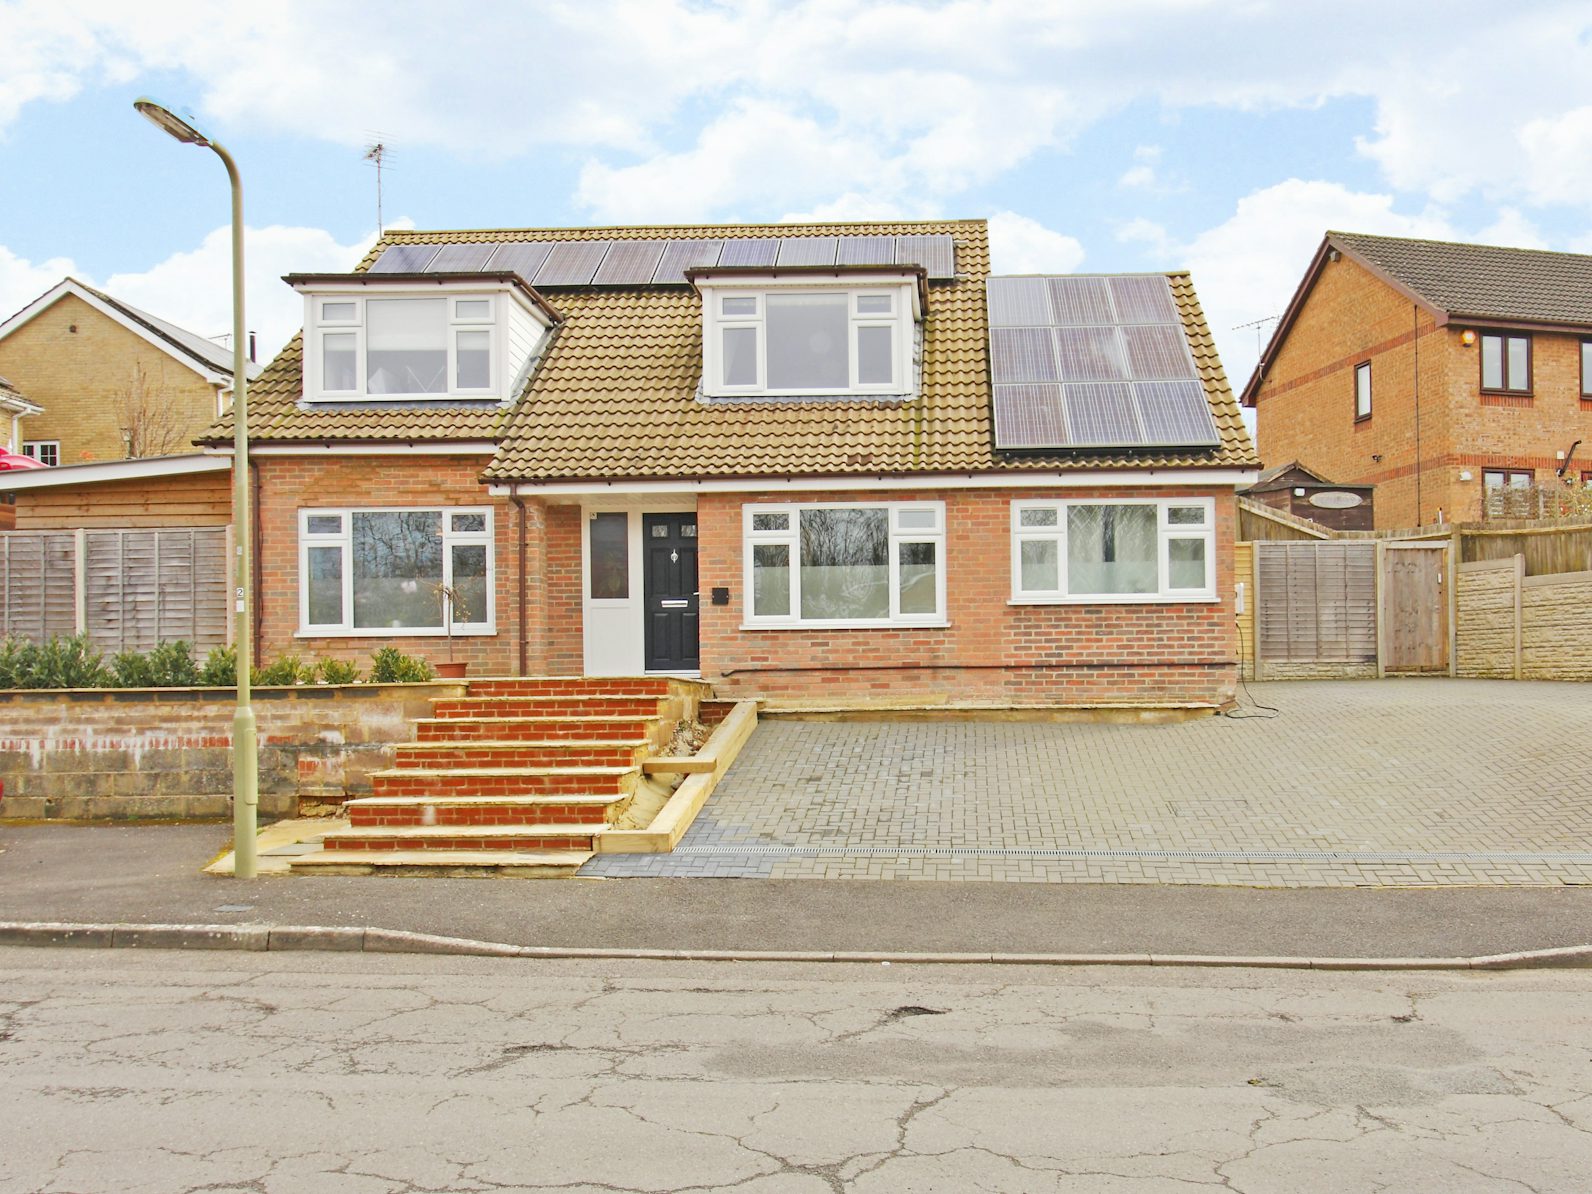 Detached House for sale on Ryon Close Andover, SP10